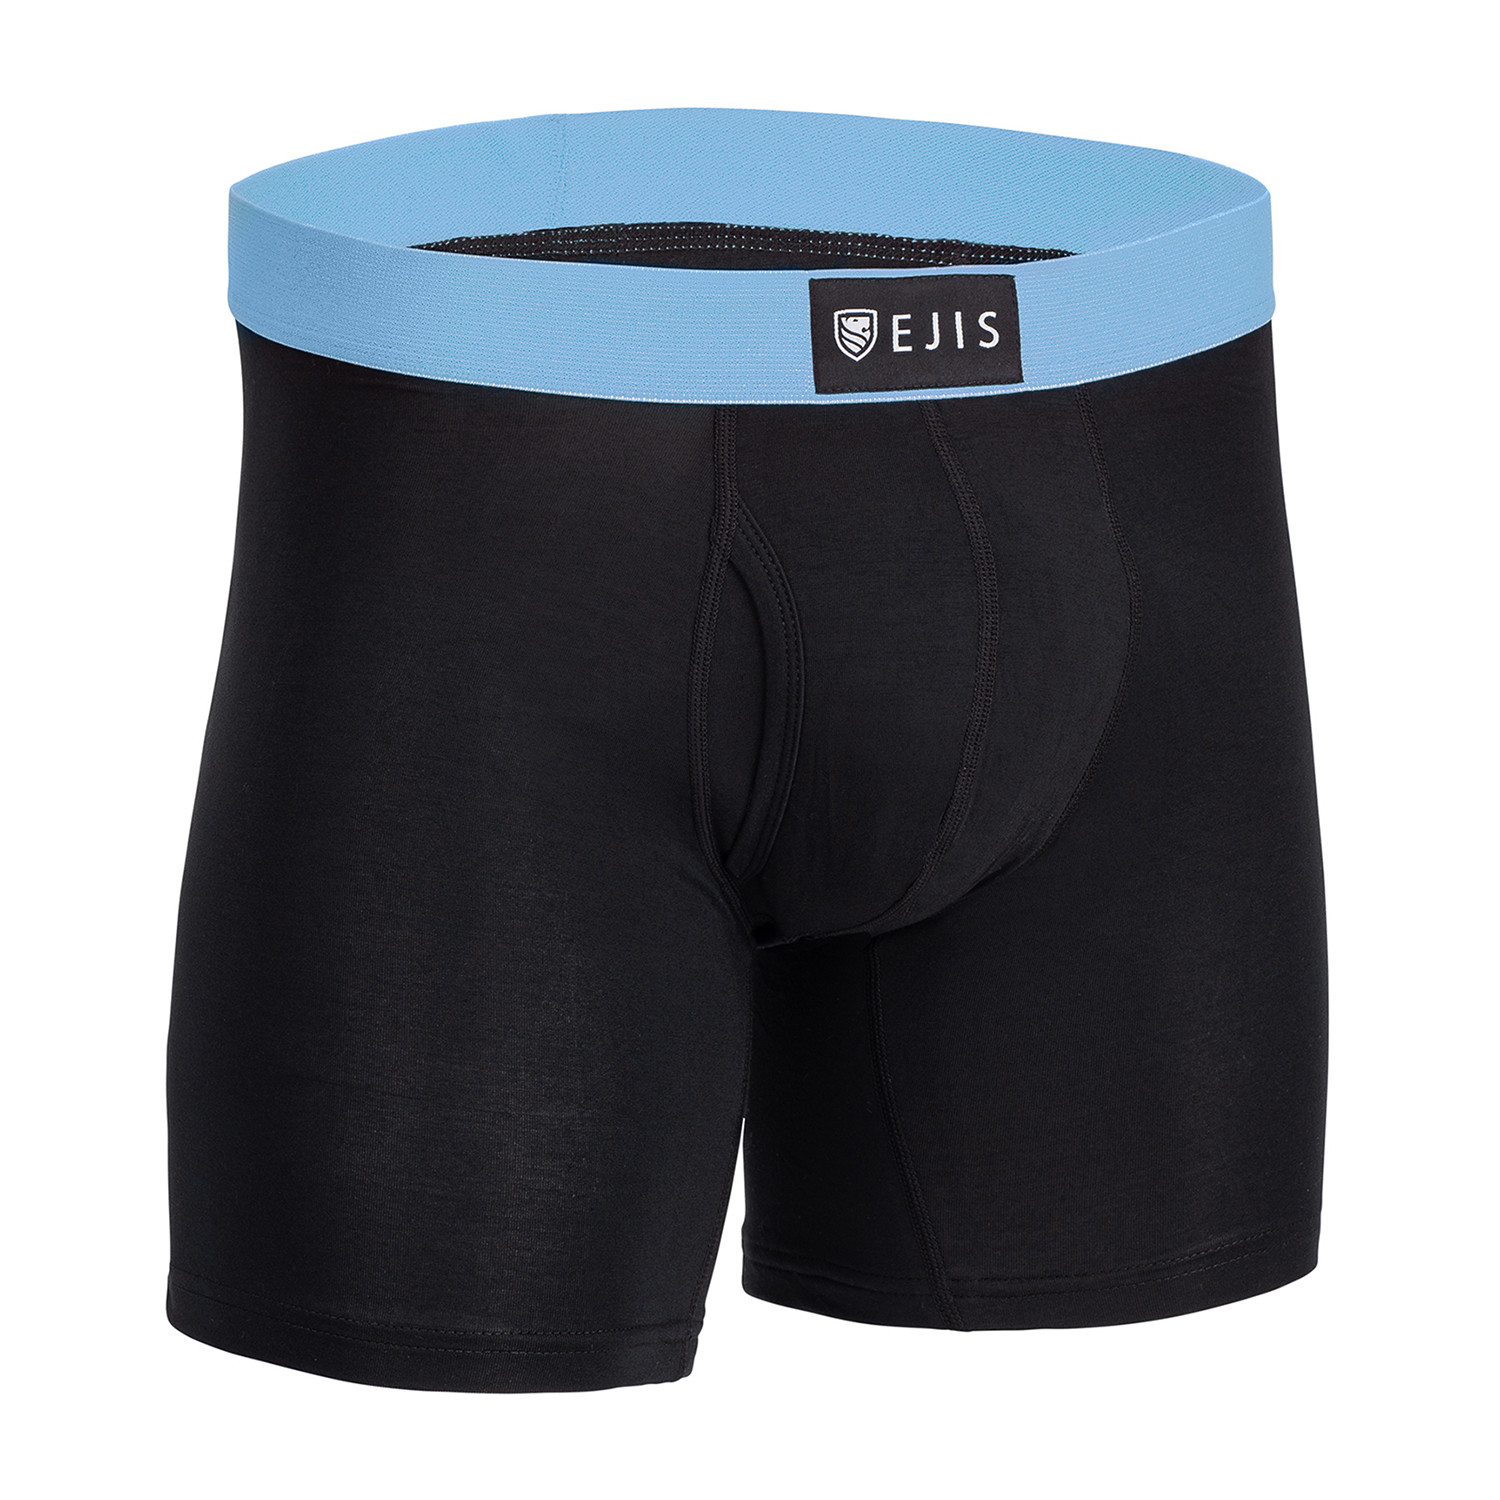 Sweat Proof Boxer Brief + Fly // Black + Blue (S) - Ejis - Touch